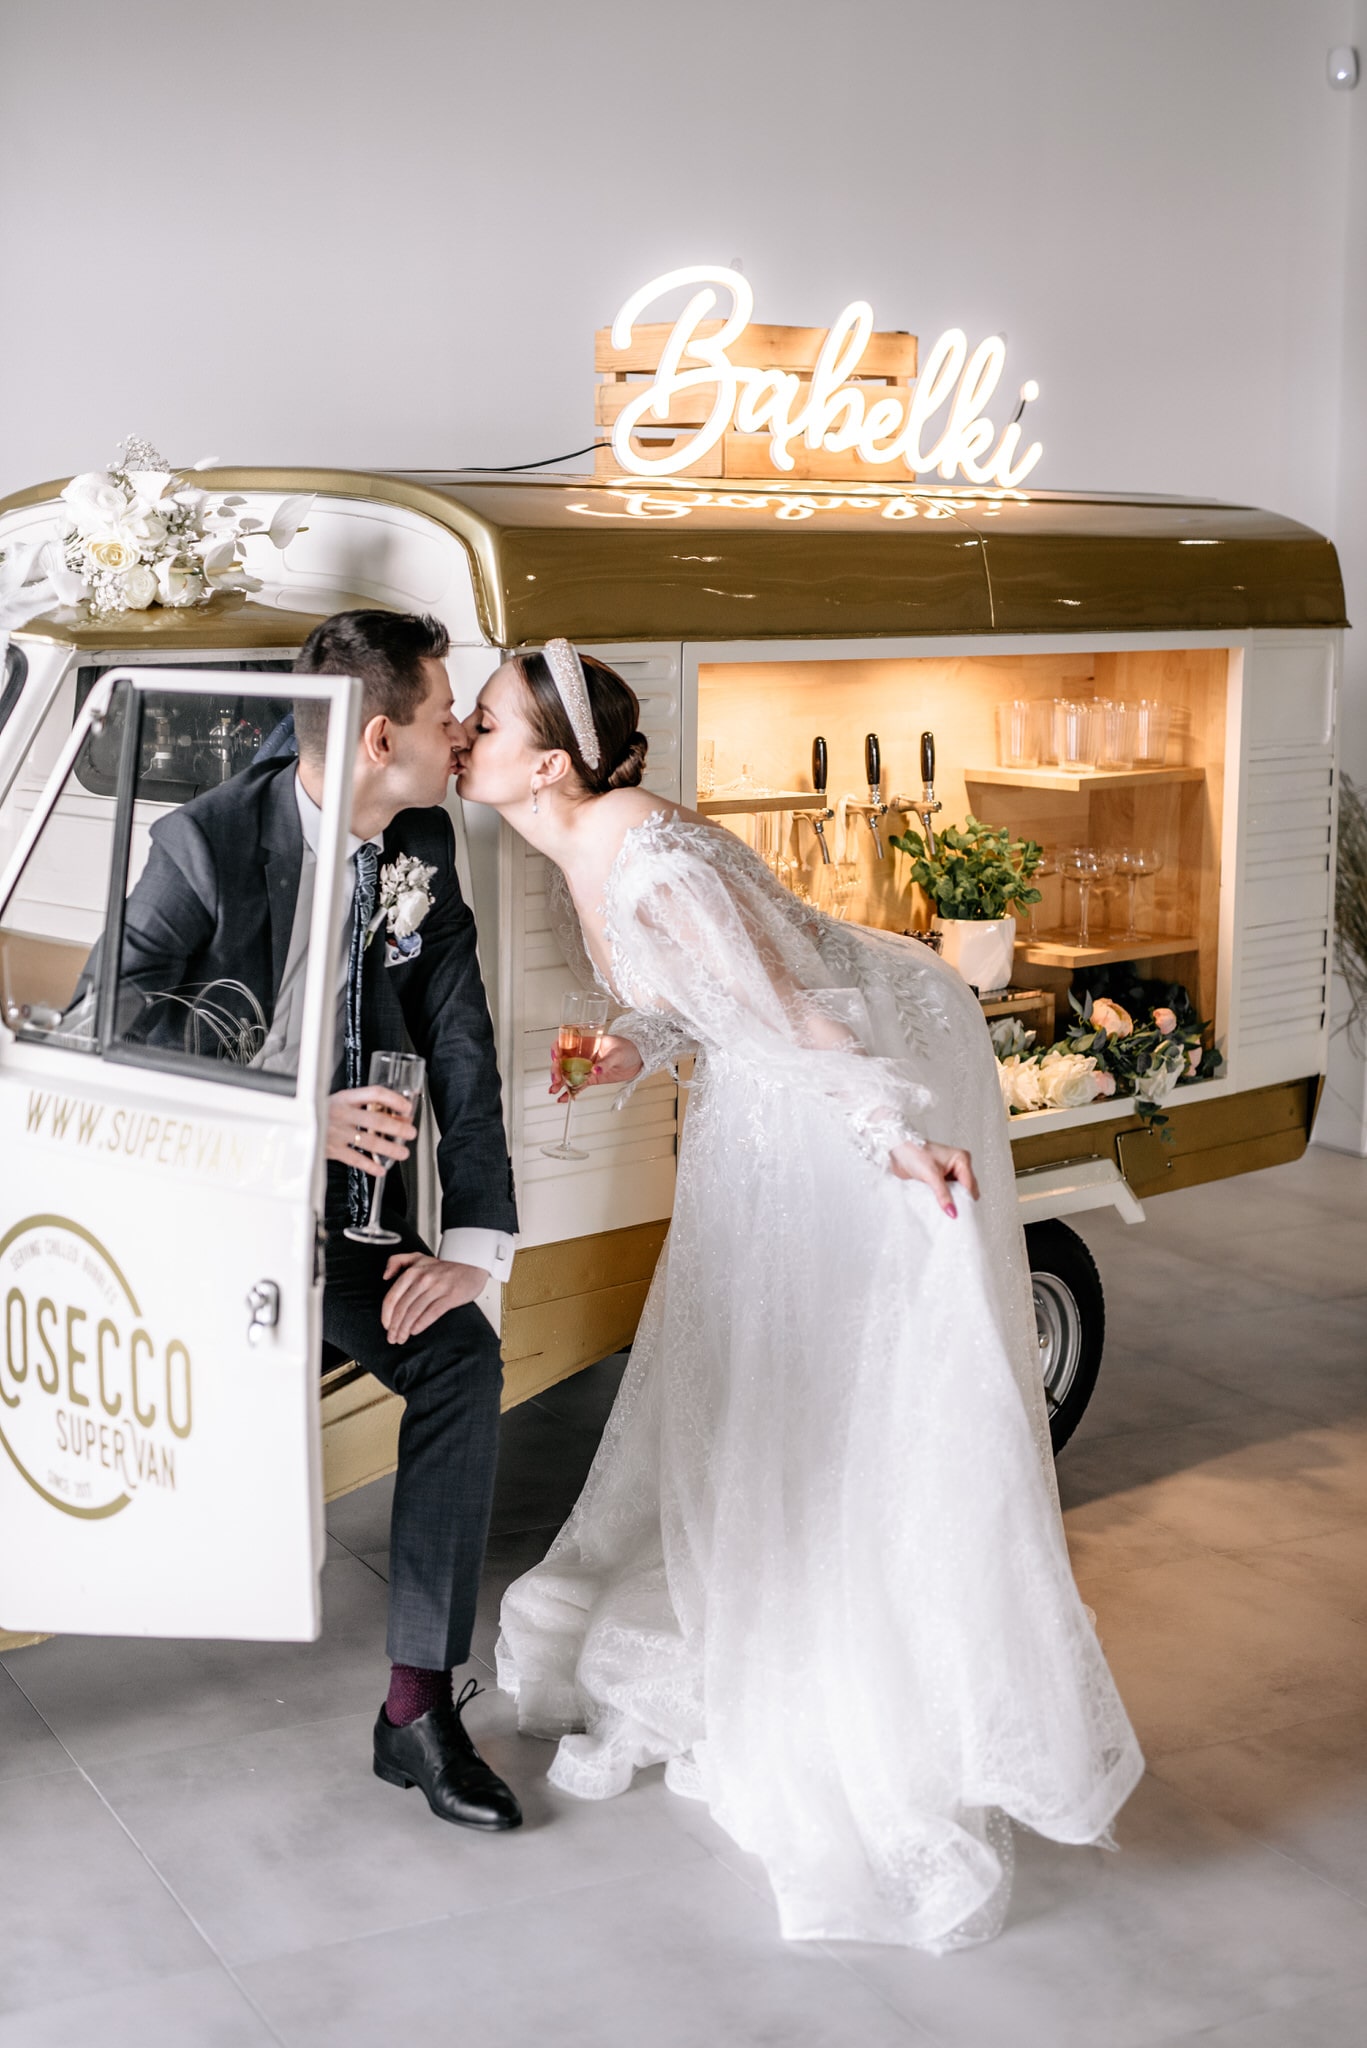 Bride and groom kissing in front of prosecco van